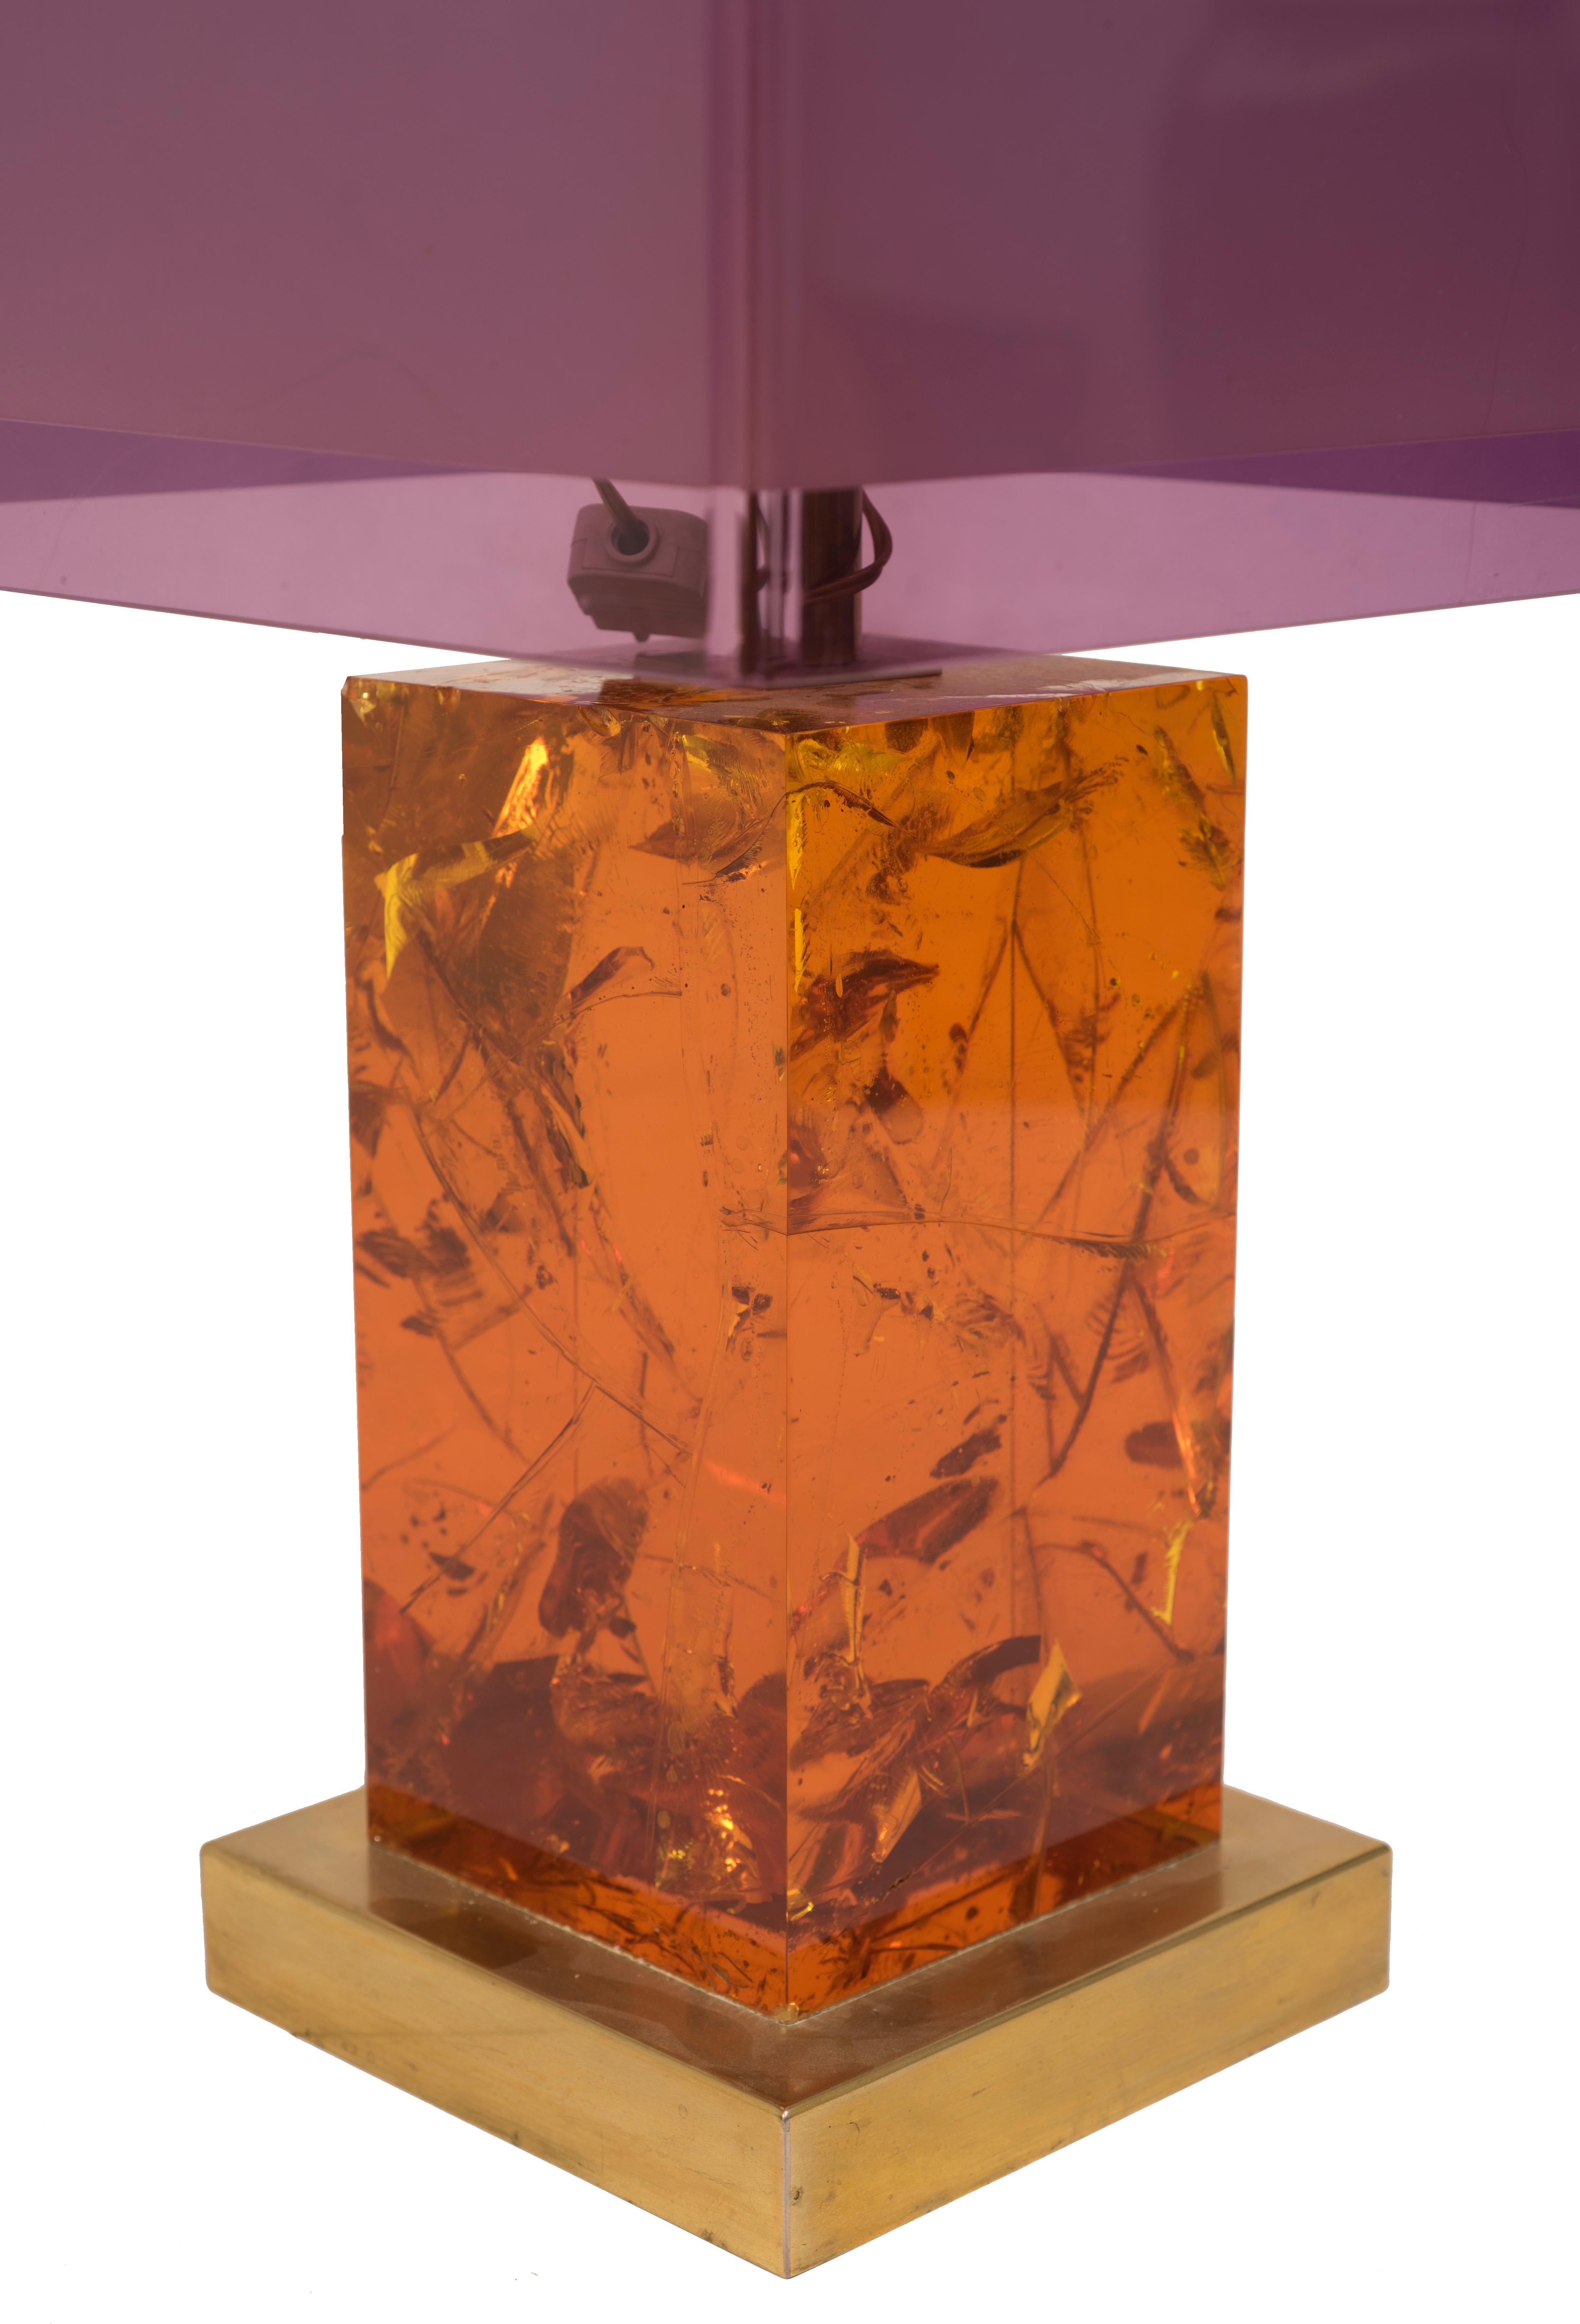 Vintage Table Lamp is an original design lamp designed by Italian Manufacturer in the 1970s.

Base in gilded brass, parallelepiped stem in amber resin. Double cube plastic hat with opal interior. The outer part is transparent and purple colored.